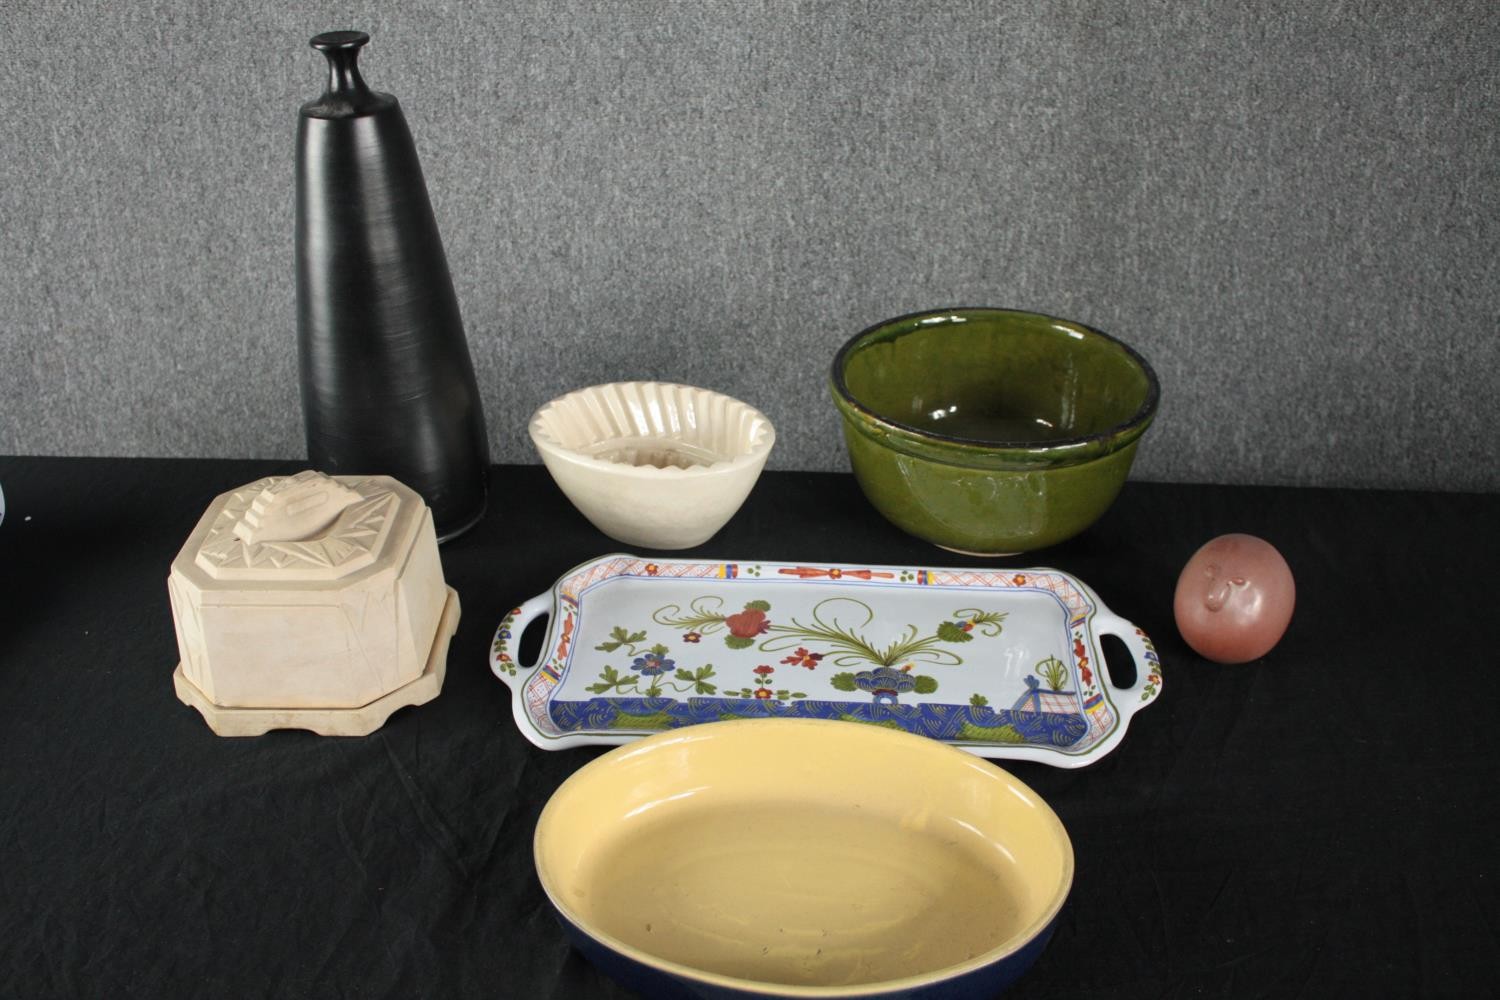 A mixed collection of porcelain kitchenware and a vase. Including a butter cooler, dish and a